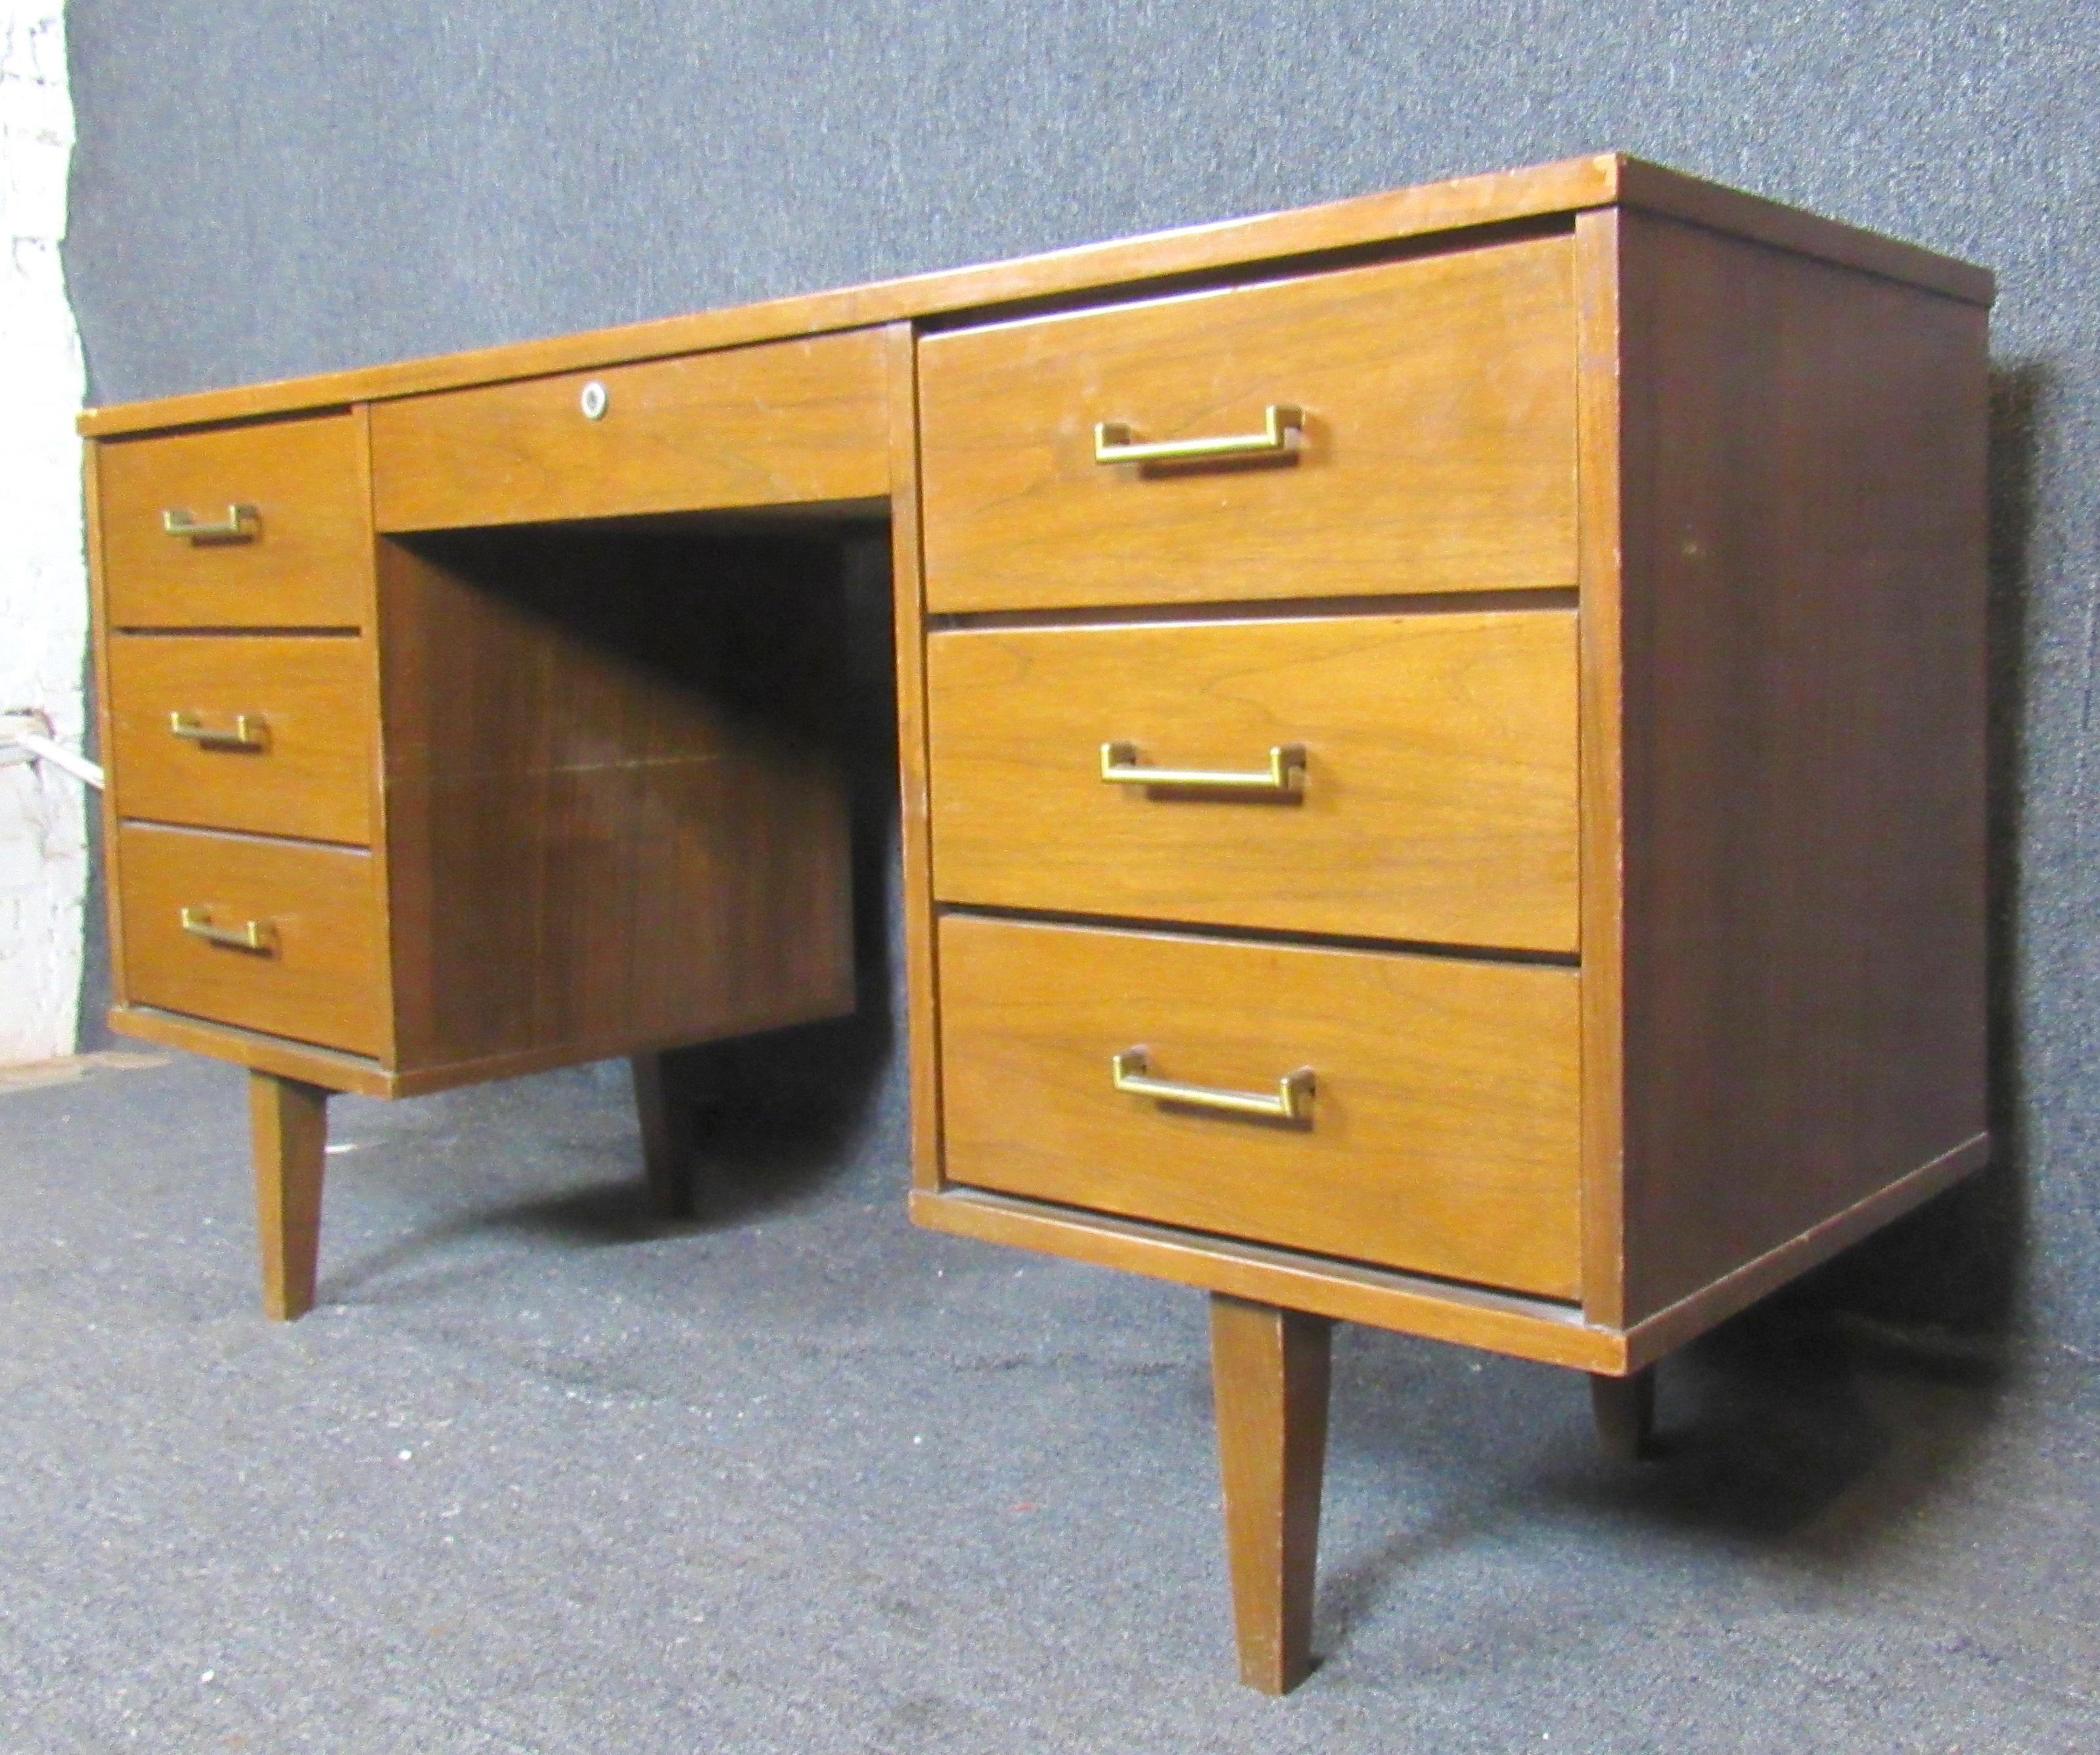 Double pedestal mid-century desk with laminate top. Six total drawers for storage and finished wood back.
Please confirm location.